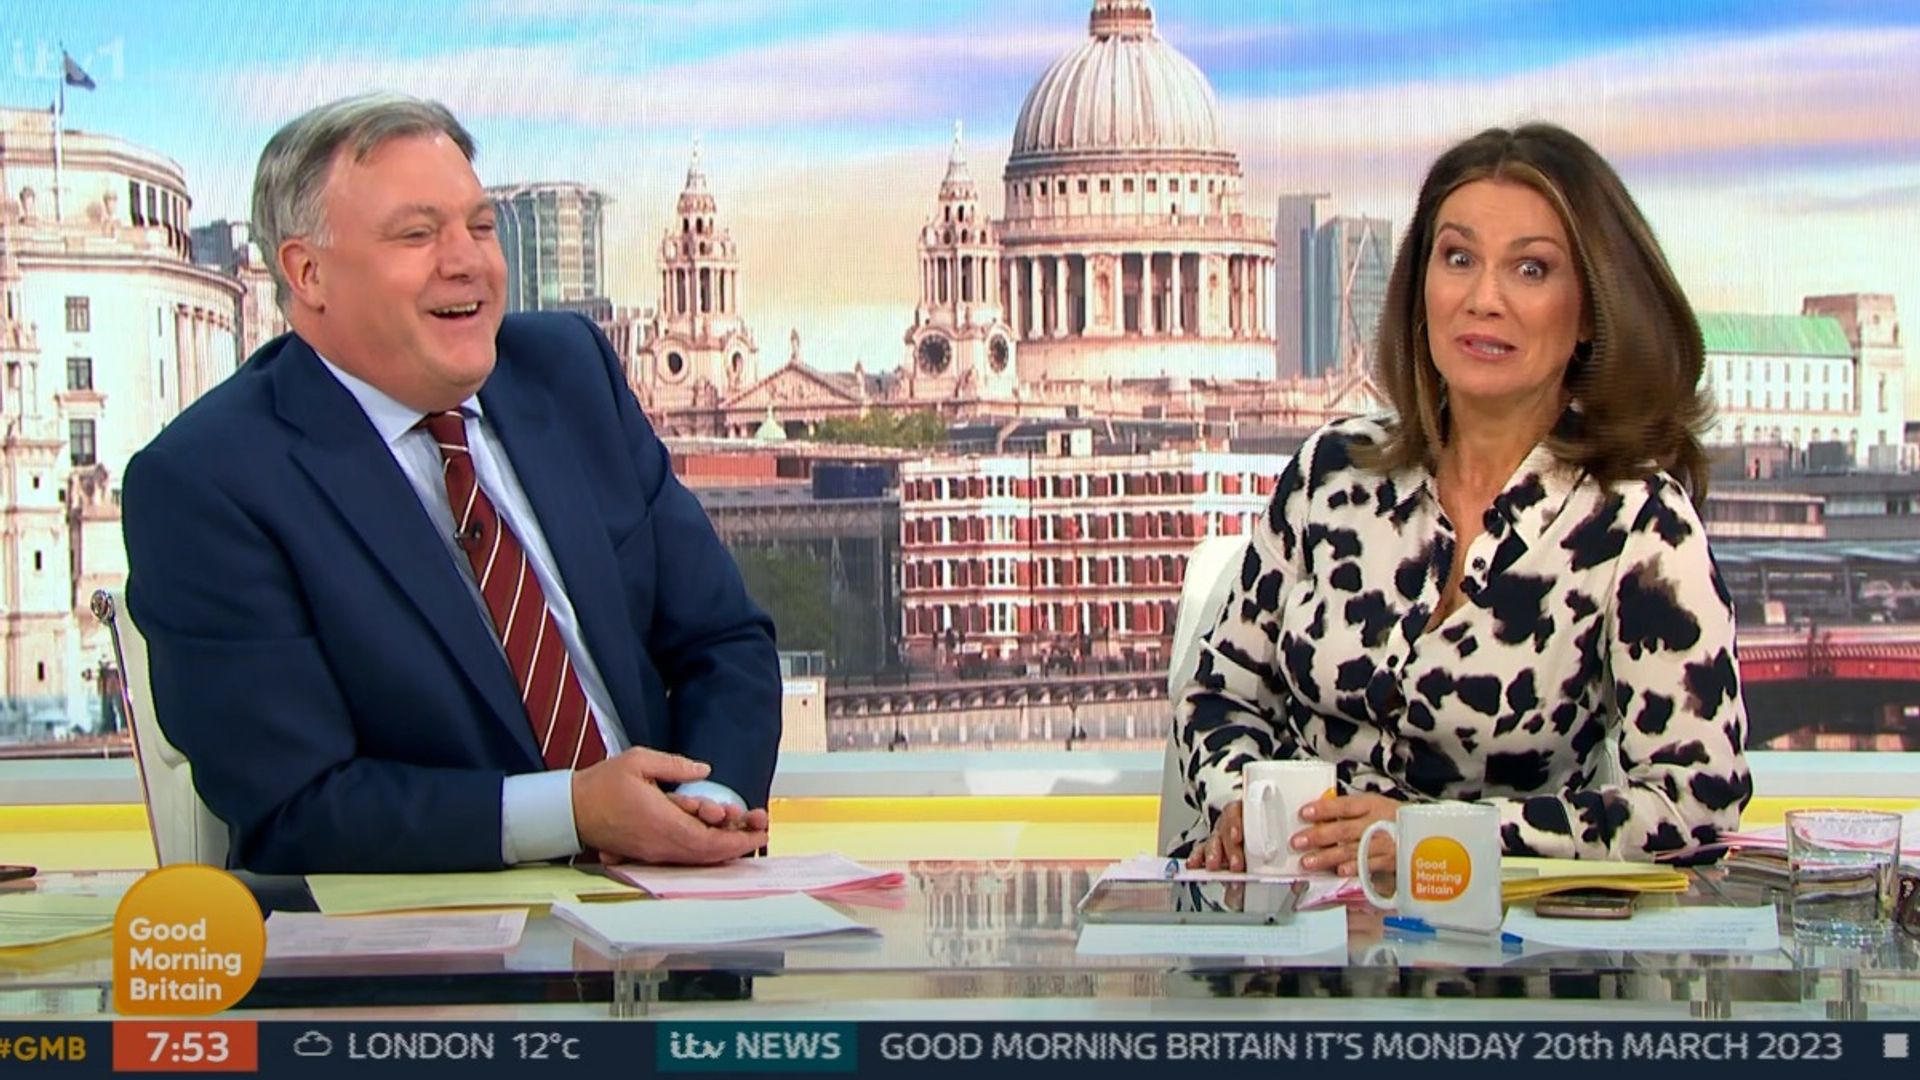 GMB’s Susanna Reid stunned after Ed Balls calls her ‘slow’ in awkward moment